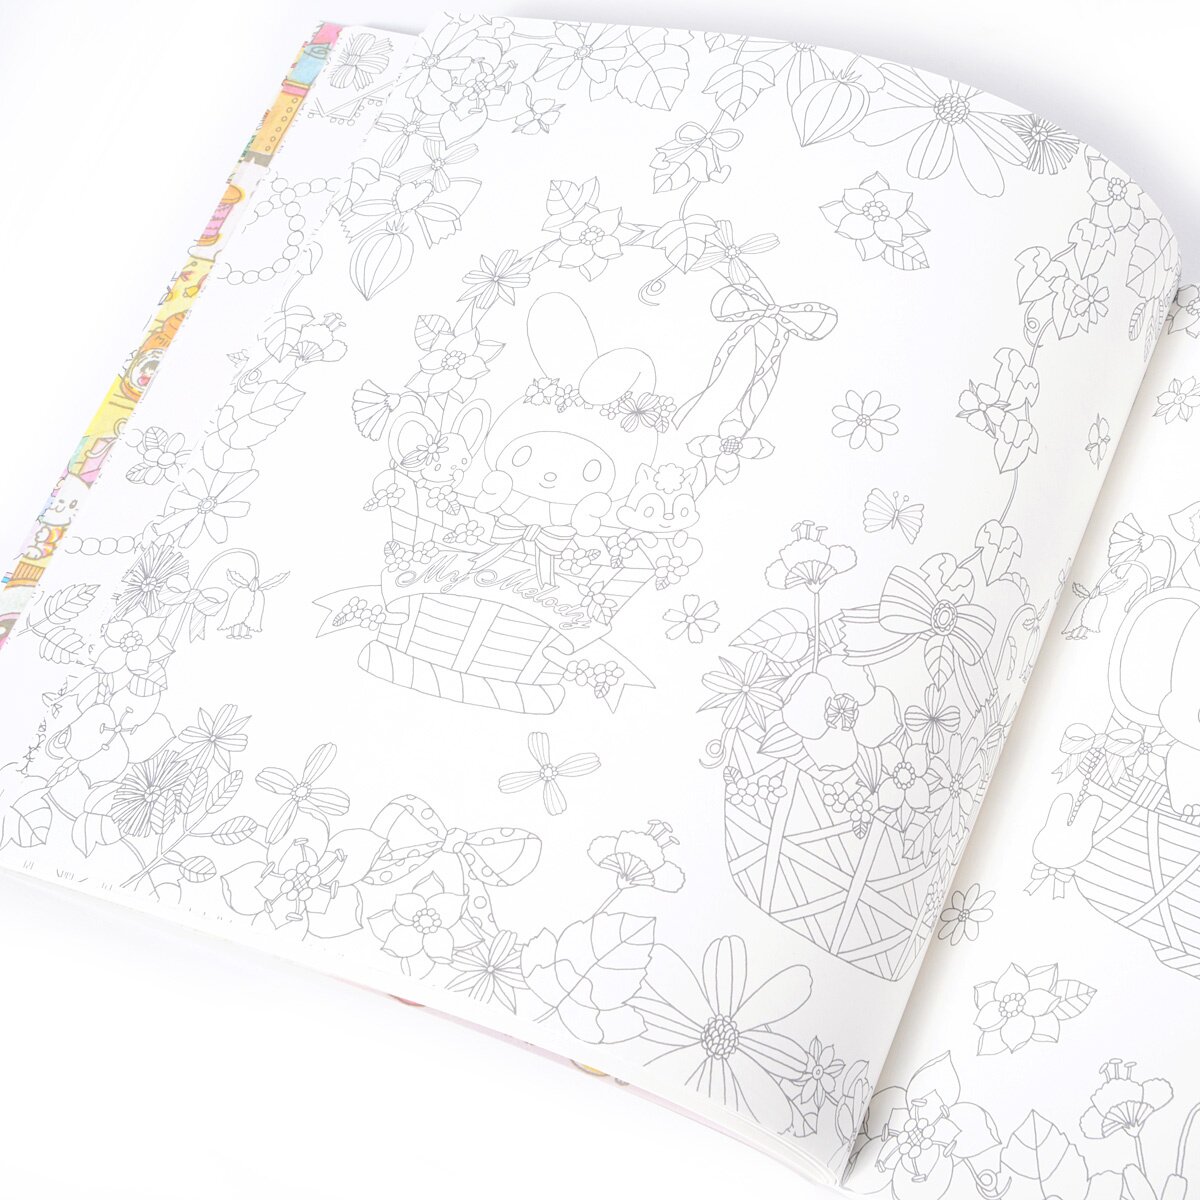 Sanrio Characters Coloring Book Japanese Edition Shipping From Japan